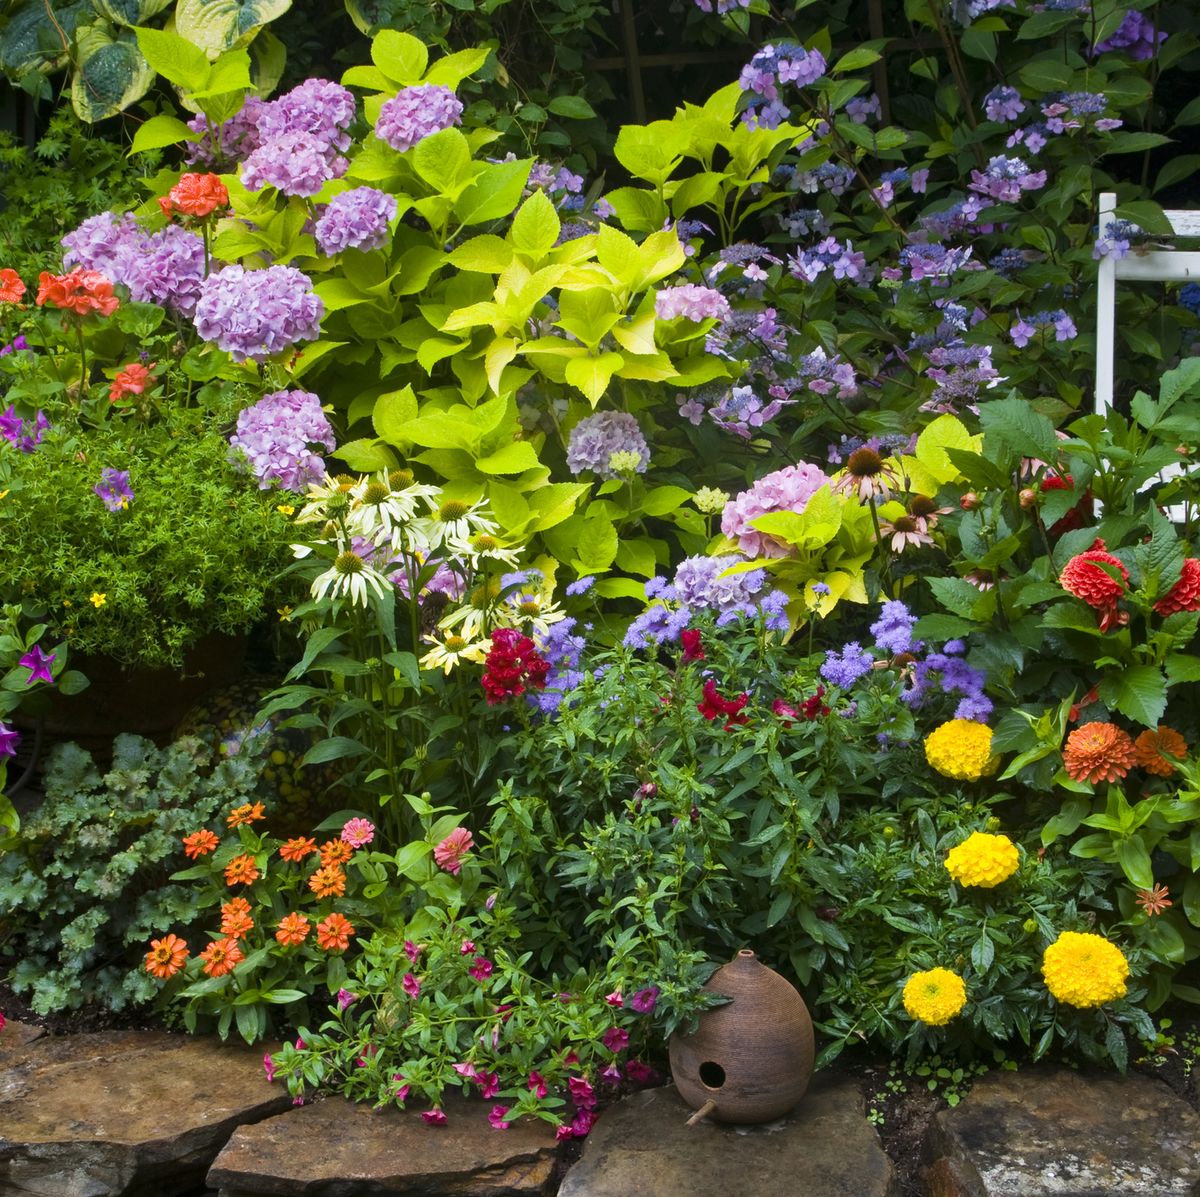 How to Grow a Flower Garden - World of Flowering Plants